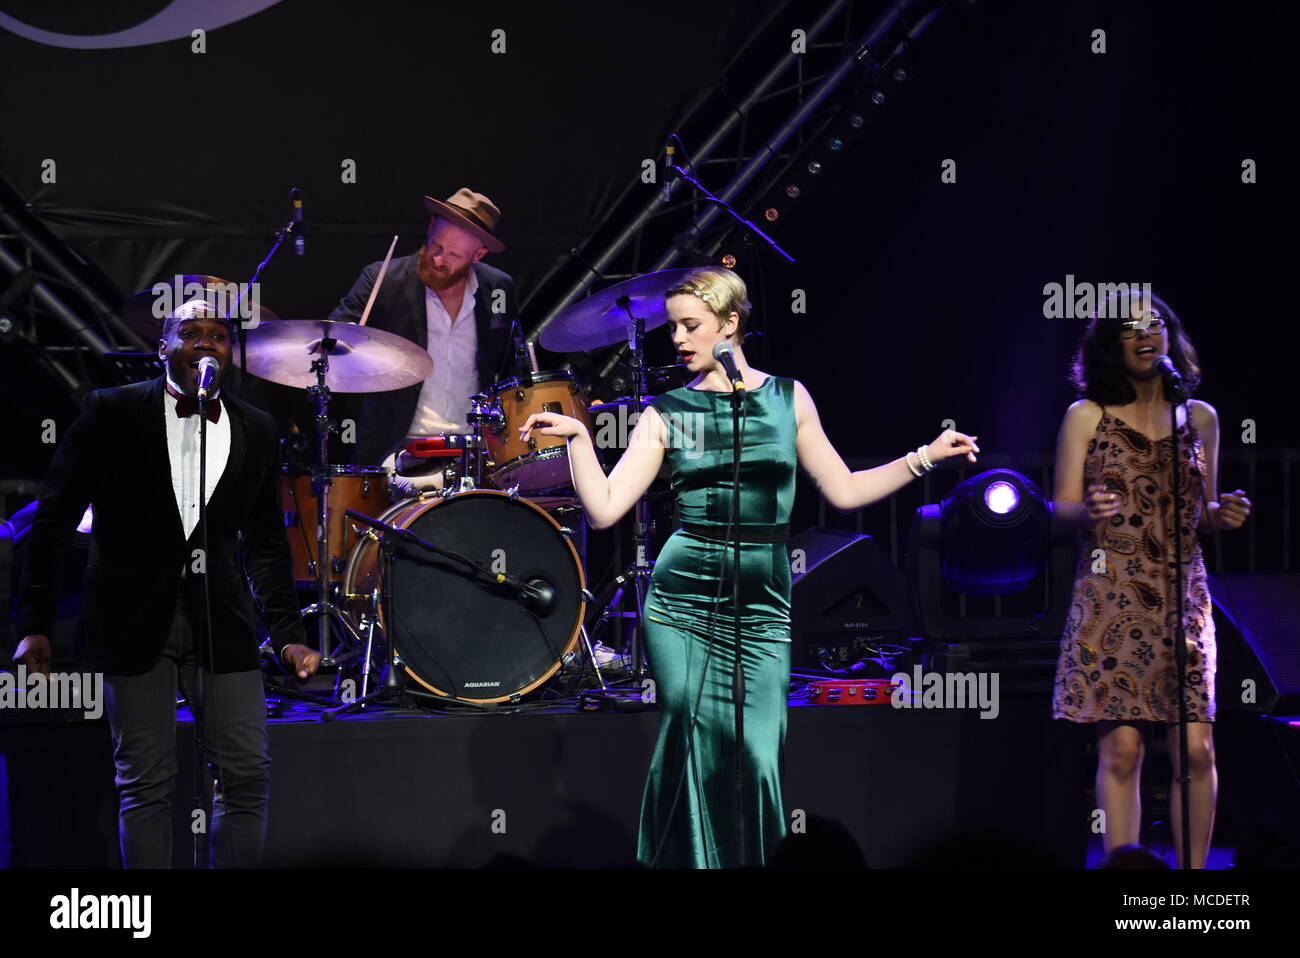 (180416) -- CASABLANCA, April 16, 2018 (Xinhua) -- Artists perform during the Jazzablanca 2018 in Casablanca, Morocco, on April 15, 2018. The 13th edition of Jazzablanca, an annual music festival, kicked off here on April 14. (Xinhua/Aissa) (zf) Stock Photo